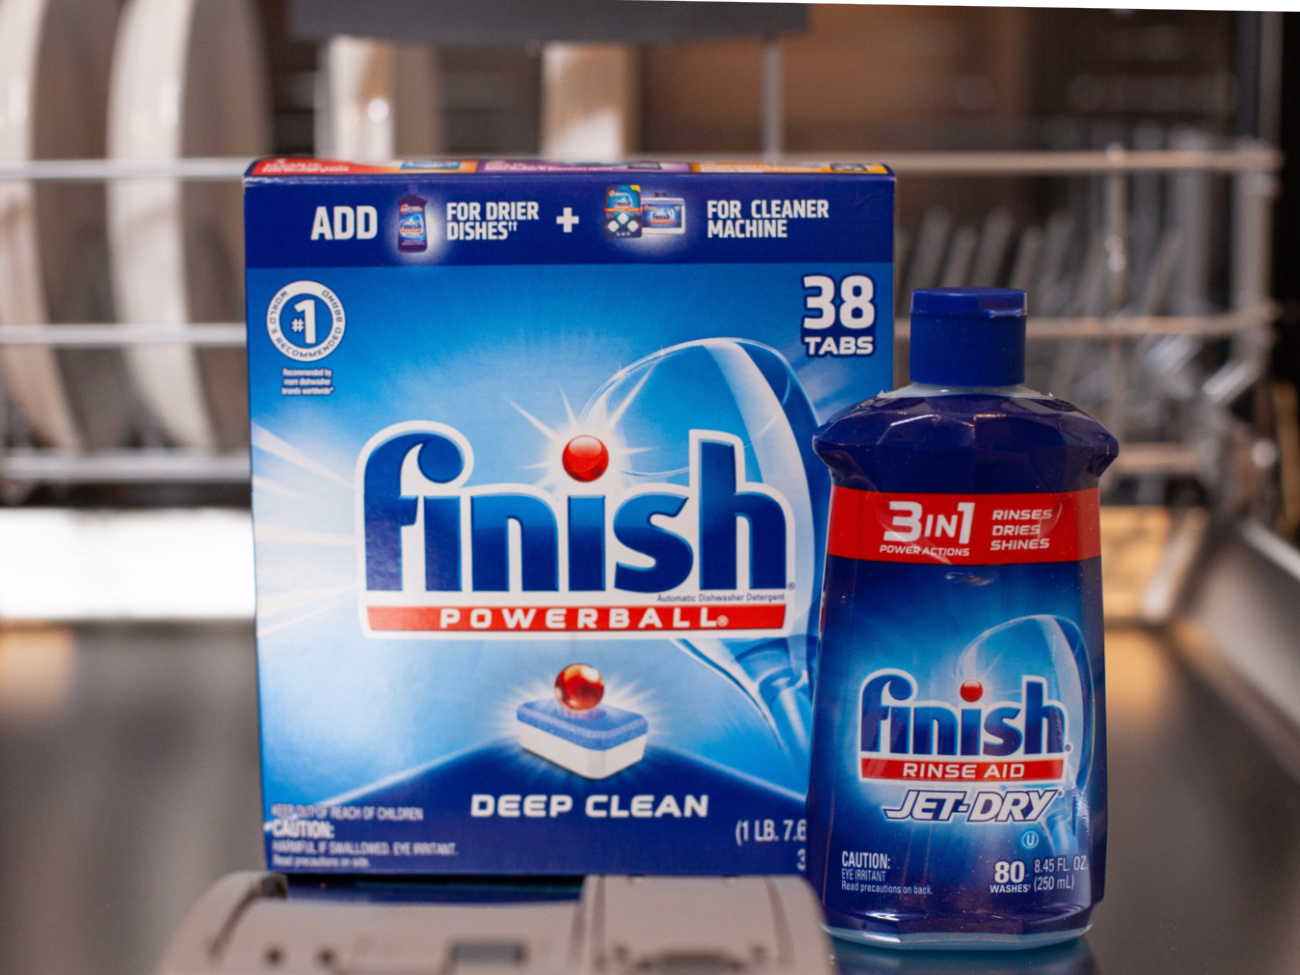 Finish Jet Dry As Low As 99¢ At Kroger - iHeartKroger